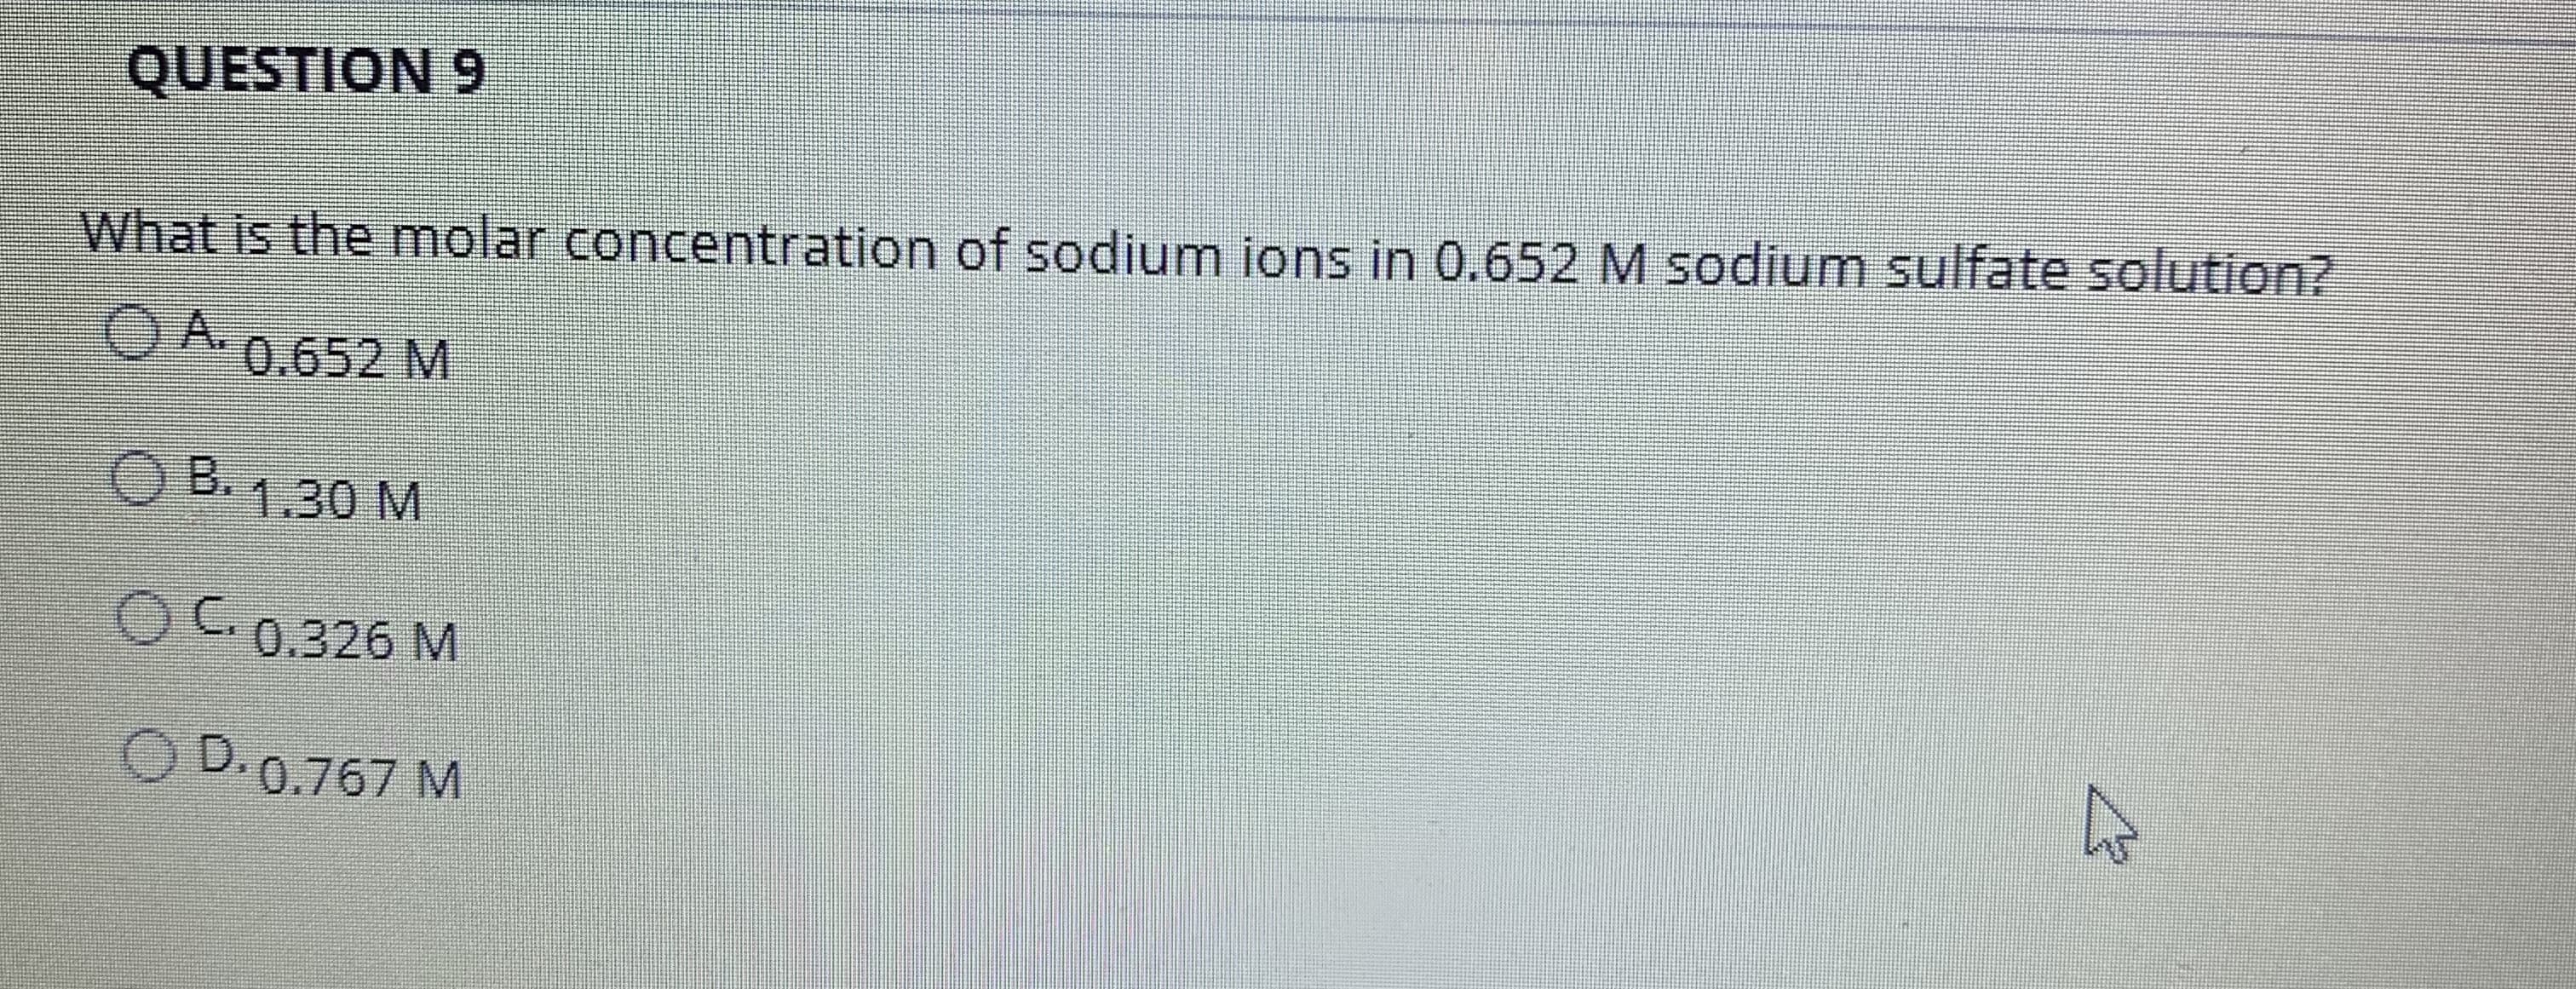 What is the molar concentration of sodium ions in 0.652 M sodium sulfate solution?
